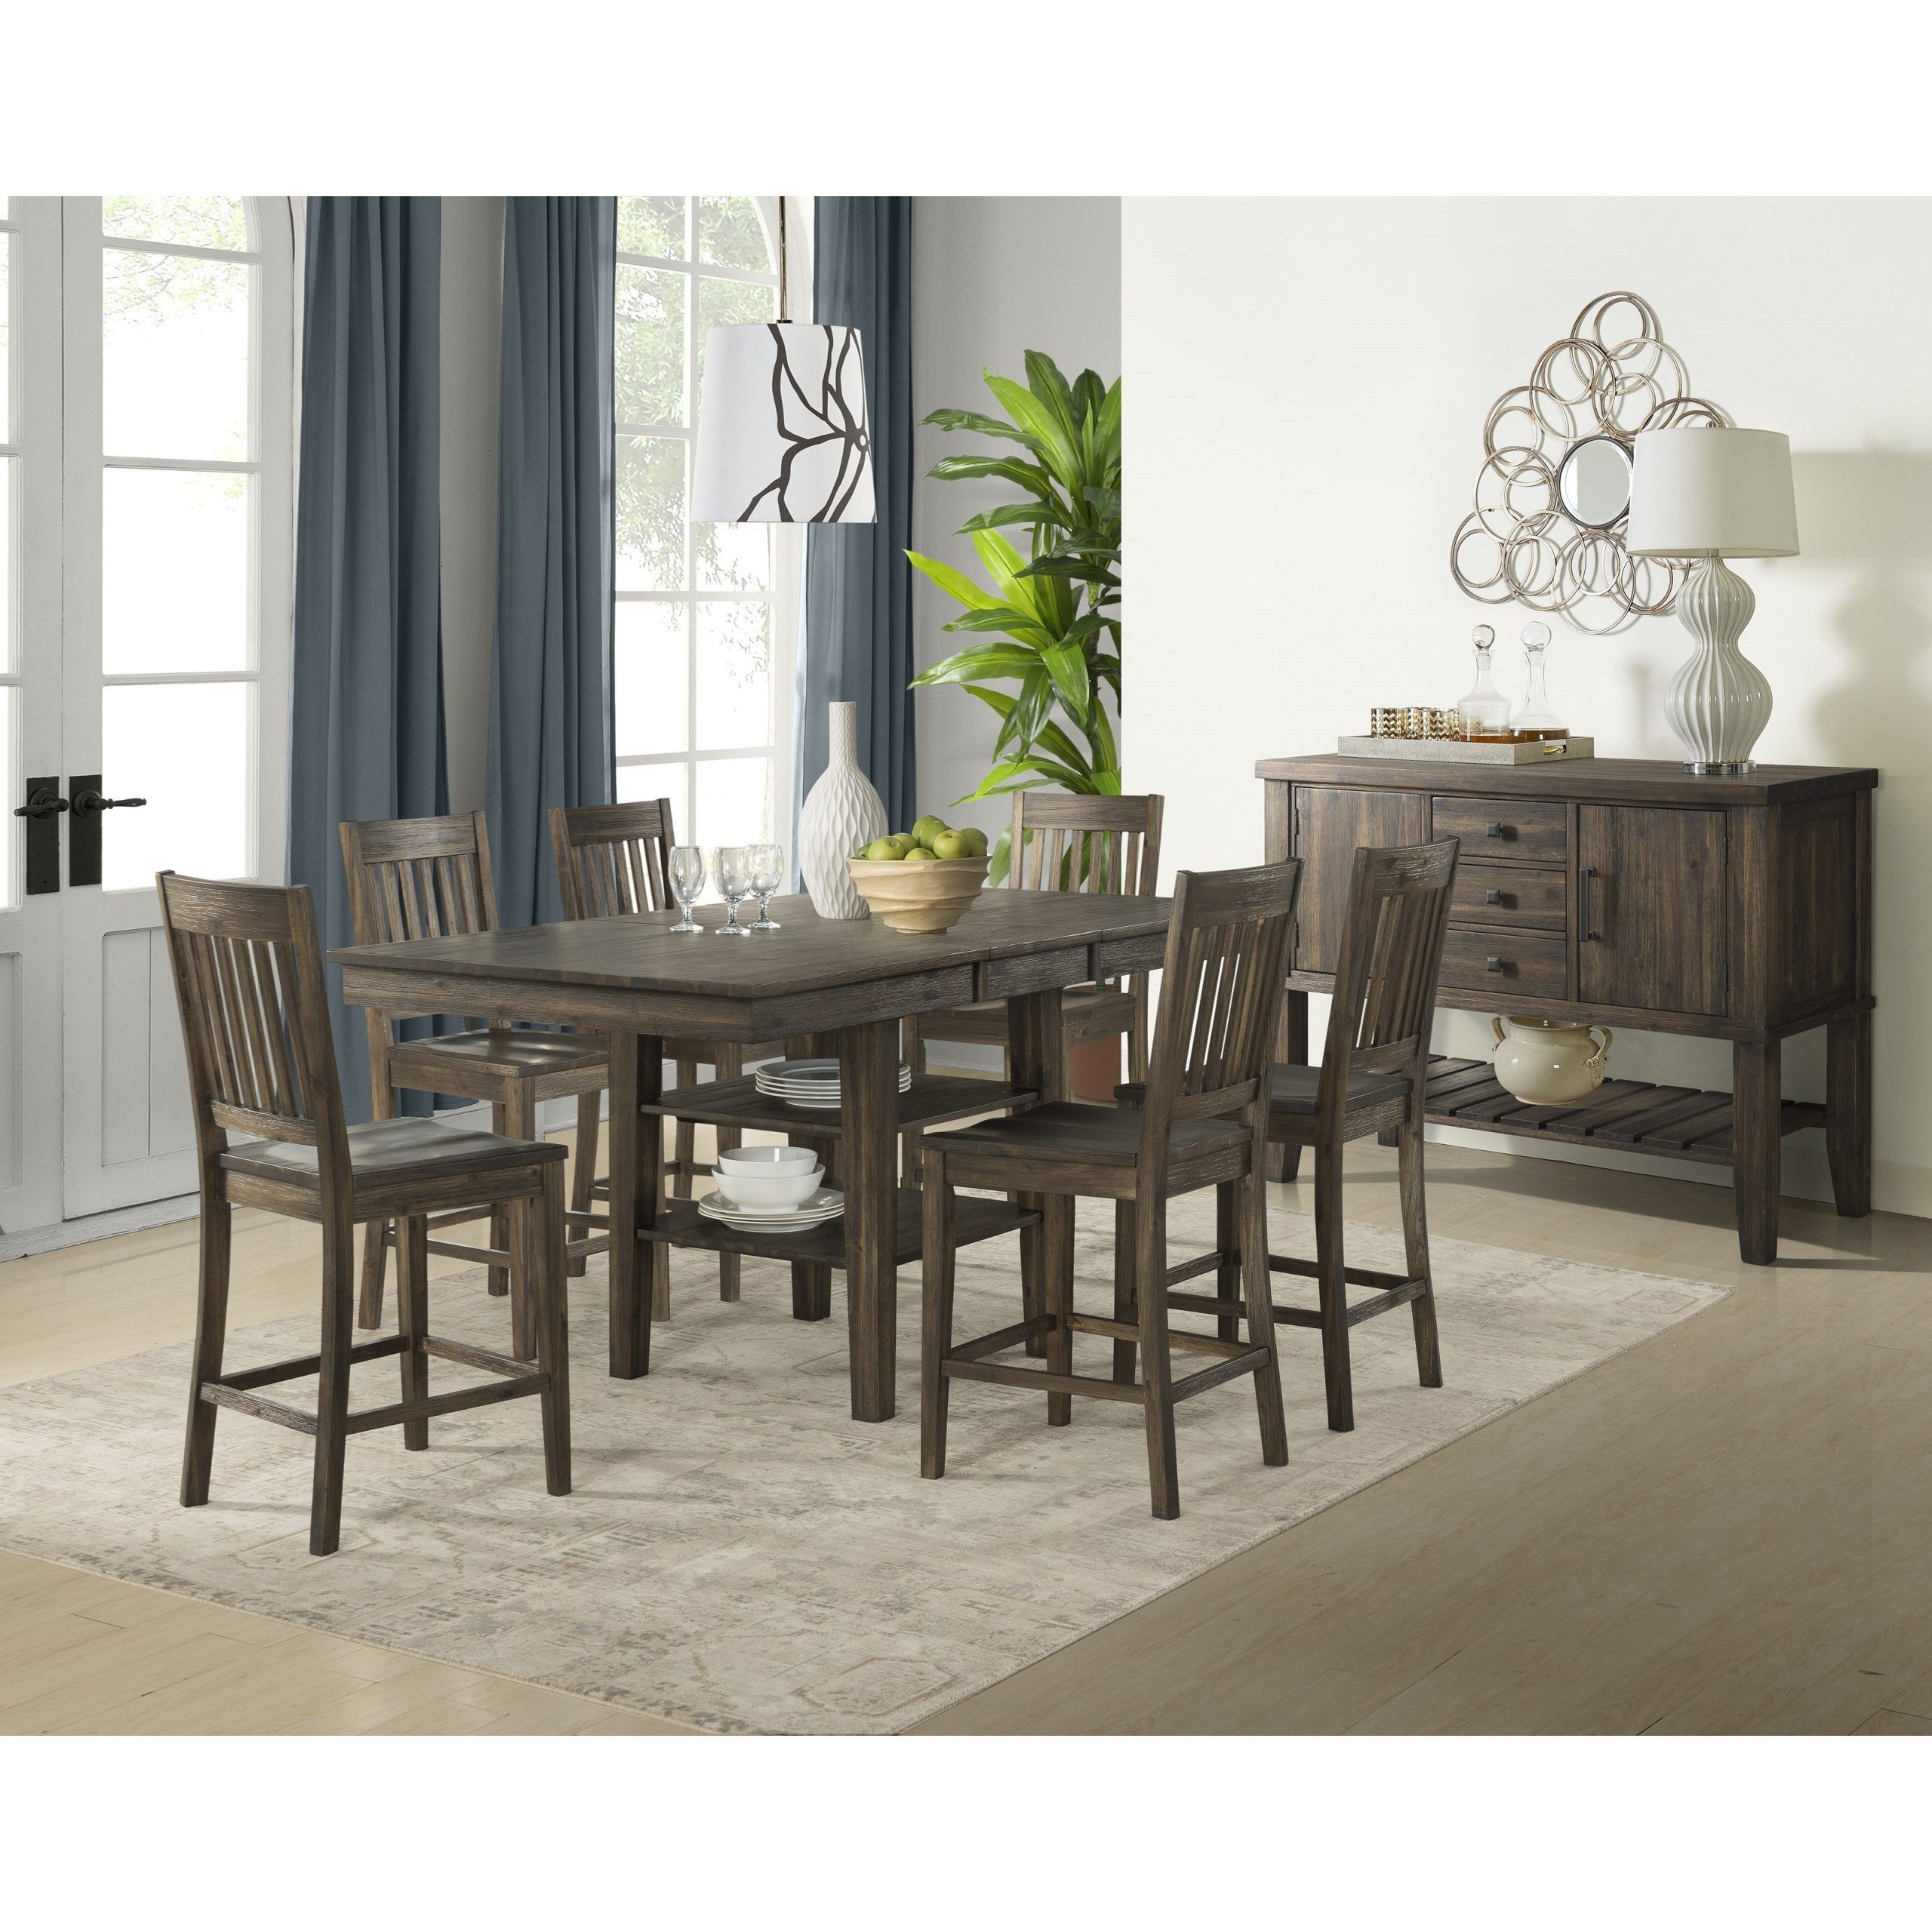 Liesel Bar Height Pedestal Dining Tables Intended For Recent Aamerica Huron Transitional Solid Wood Counter Height (View 14 of 20)